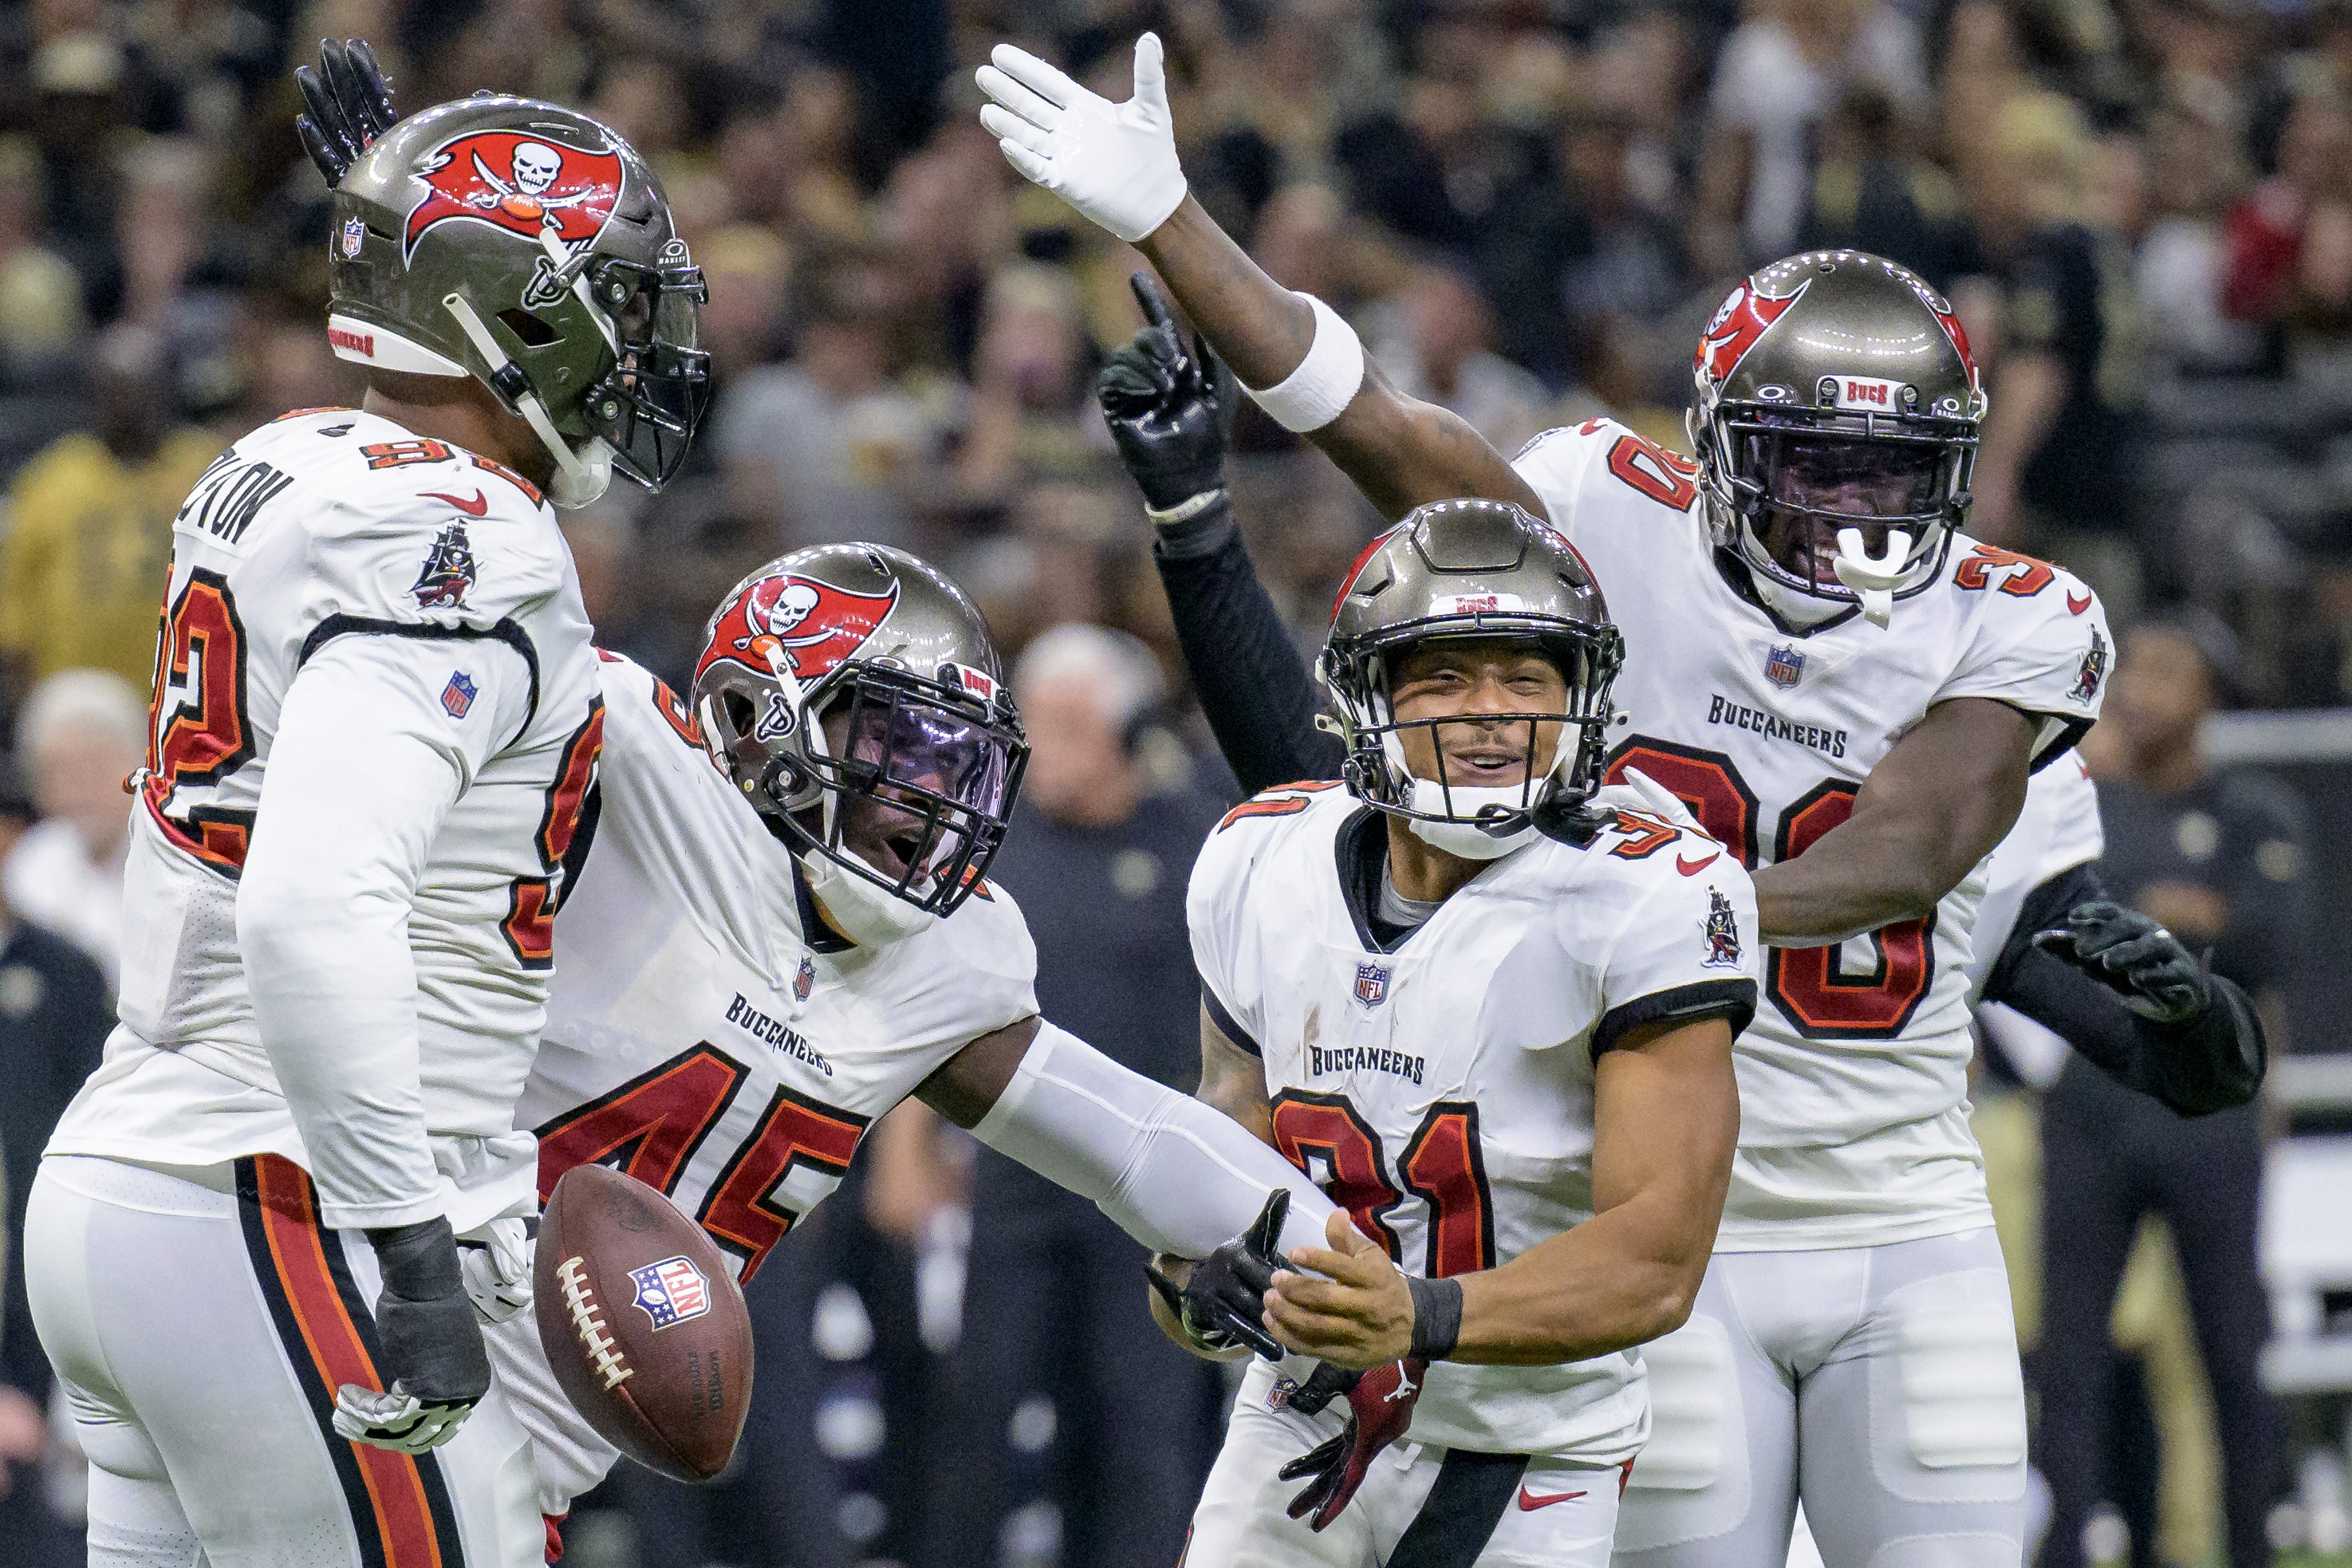 Buccaneers Take NFC South Division Lead with 26-9 Win Over Saints